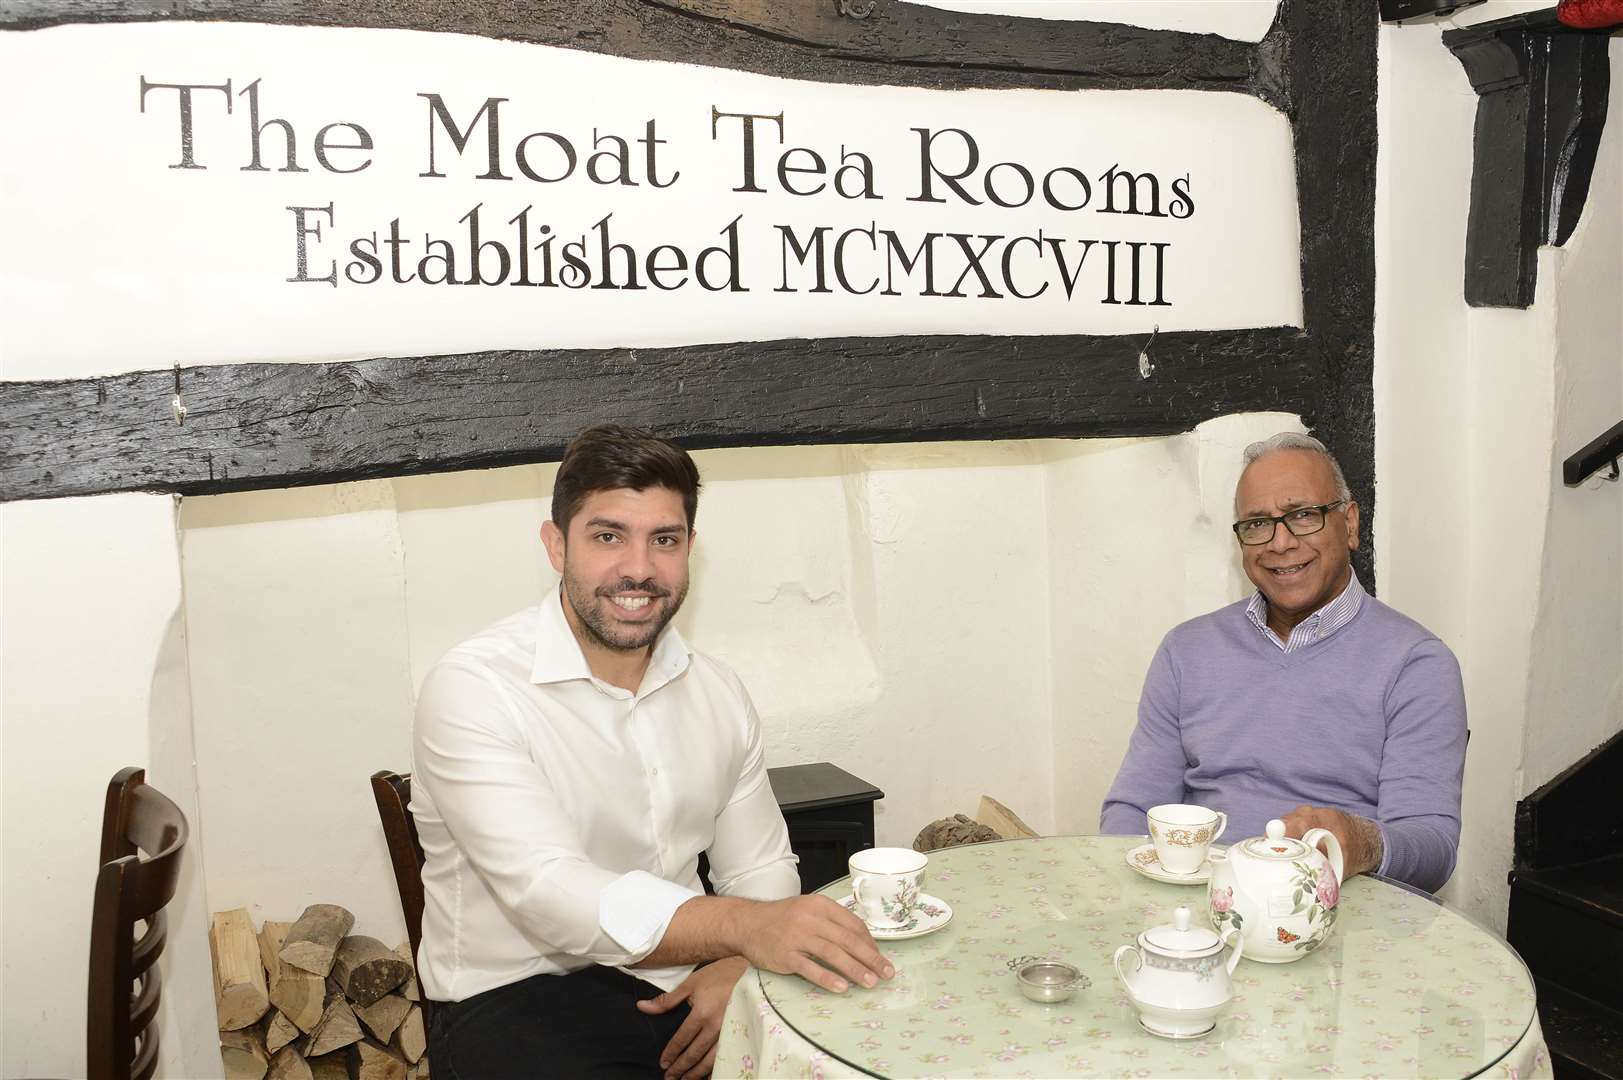 The Moat Tea Room has been running for more than 20 years